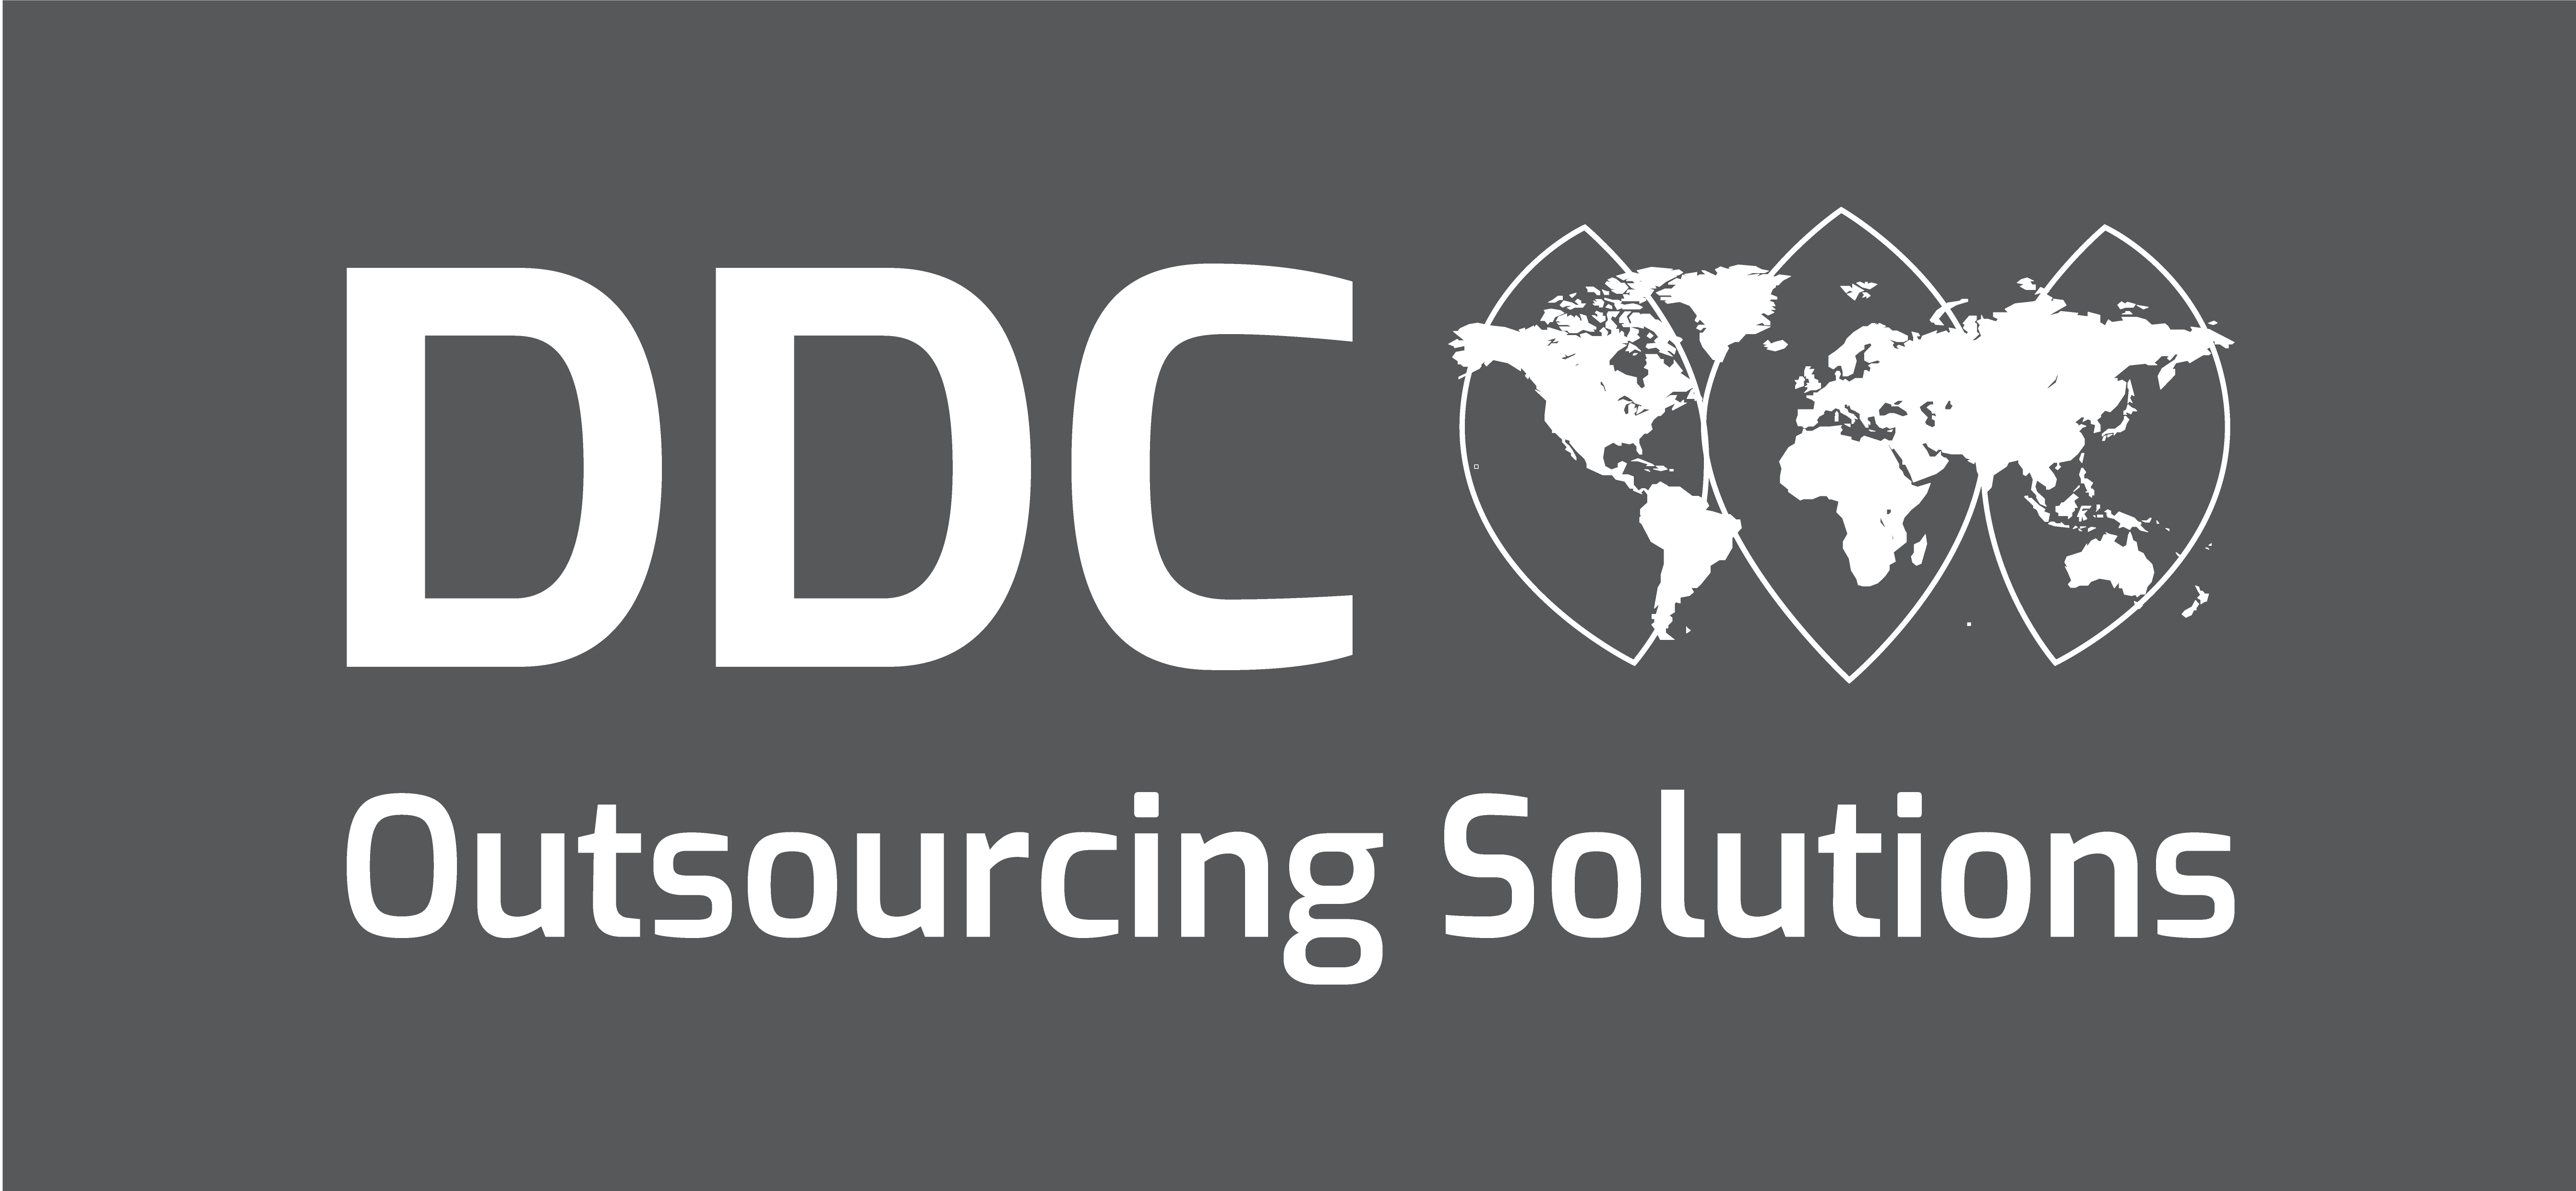 logo for DDC Outsourcing Solutions Ltd